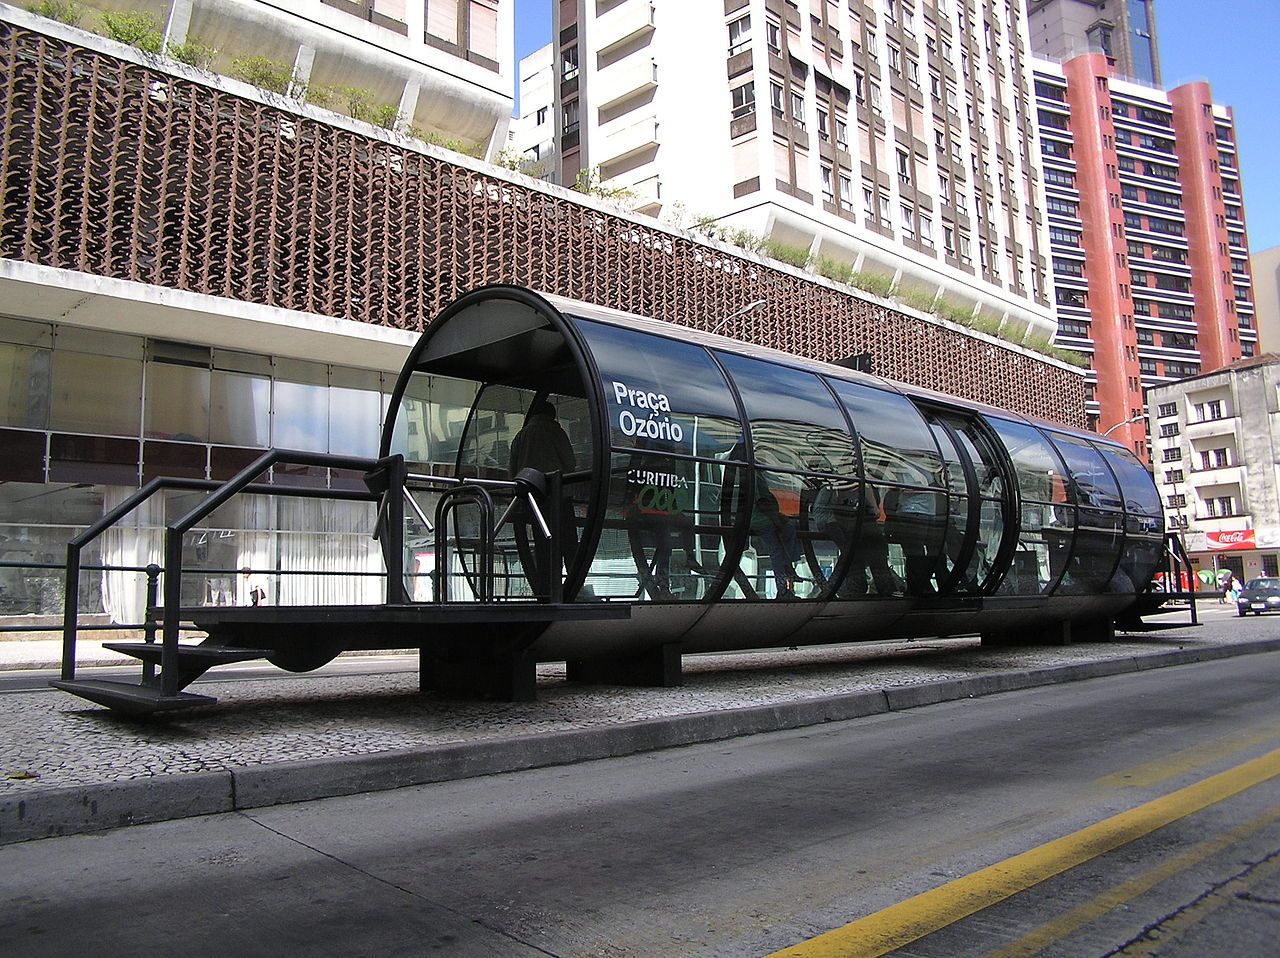 Bus stops are raised so passengers are level with bus entrances for smoother boarding.